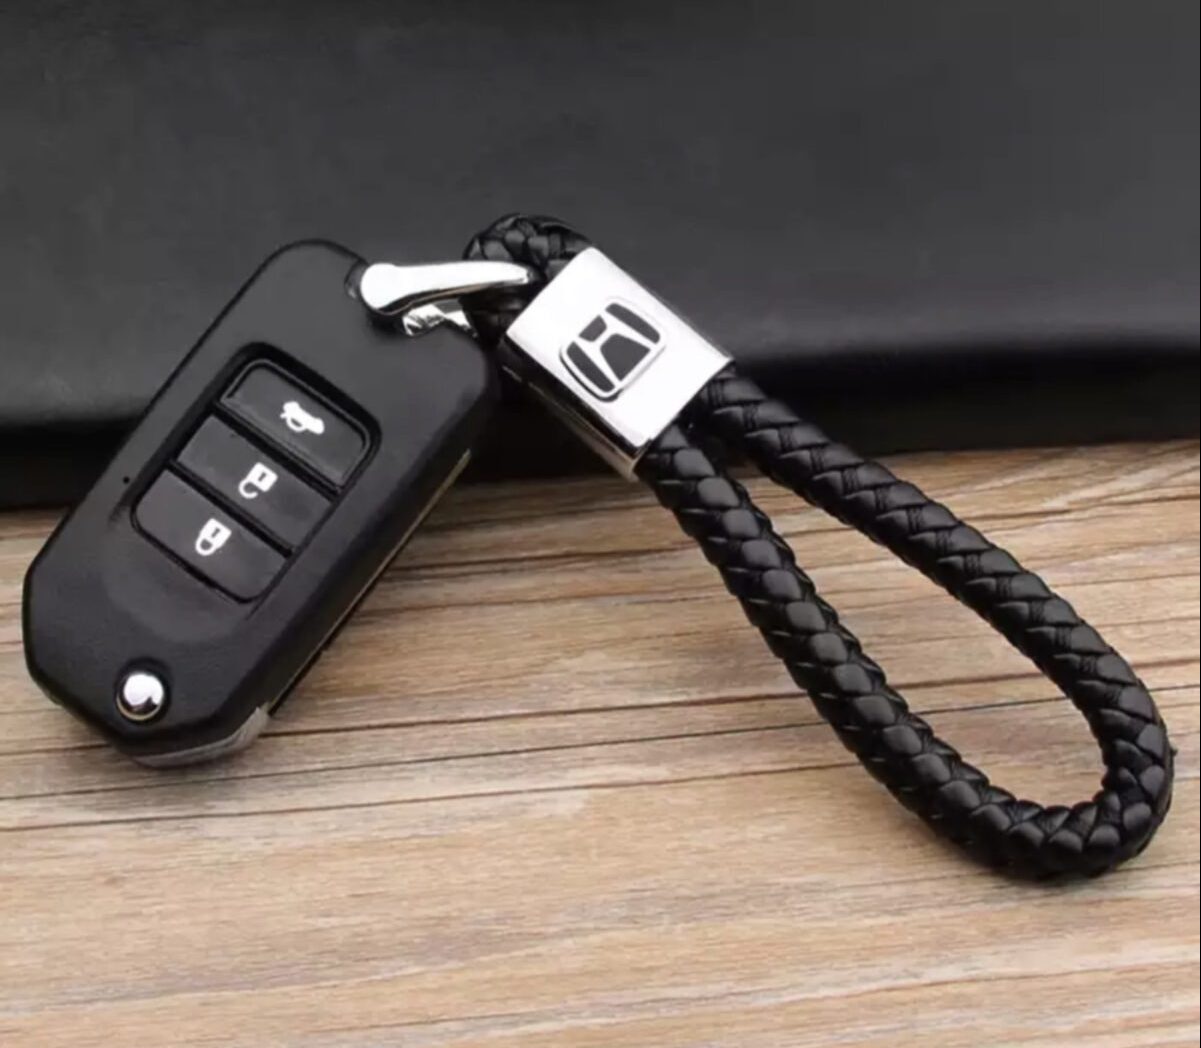 Honda Key Fob Battery Replacement Cost